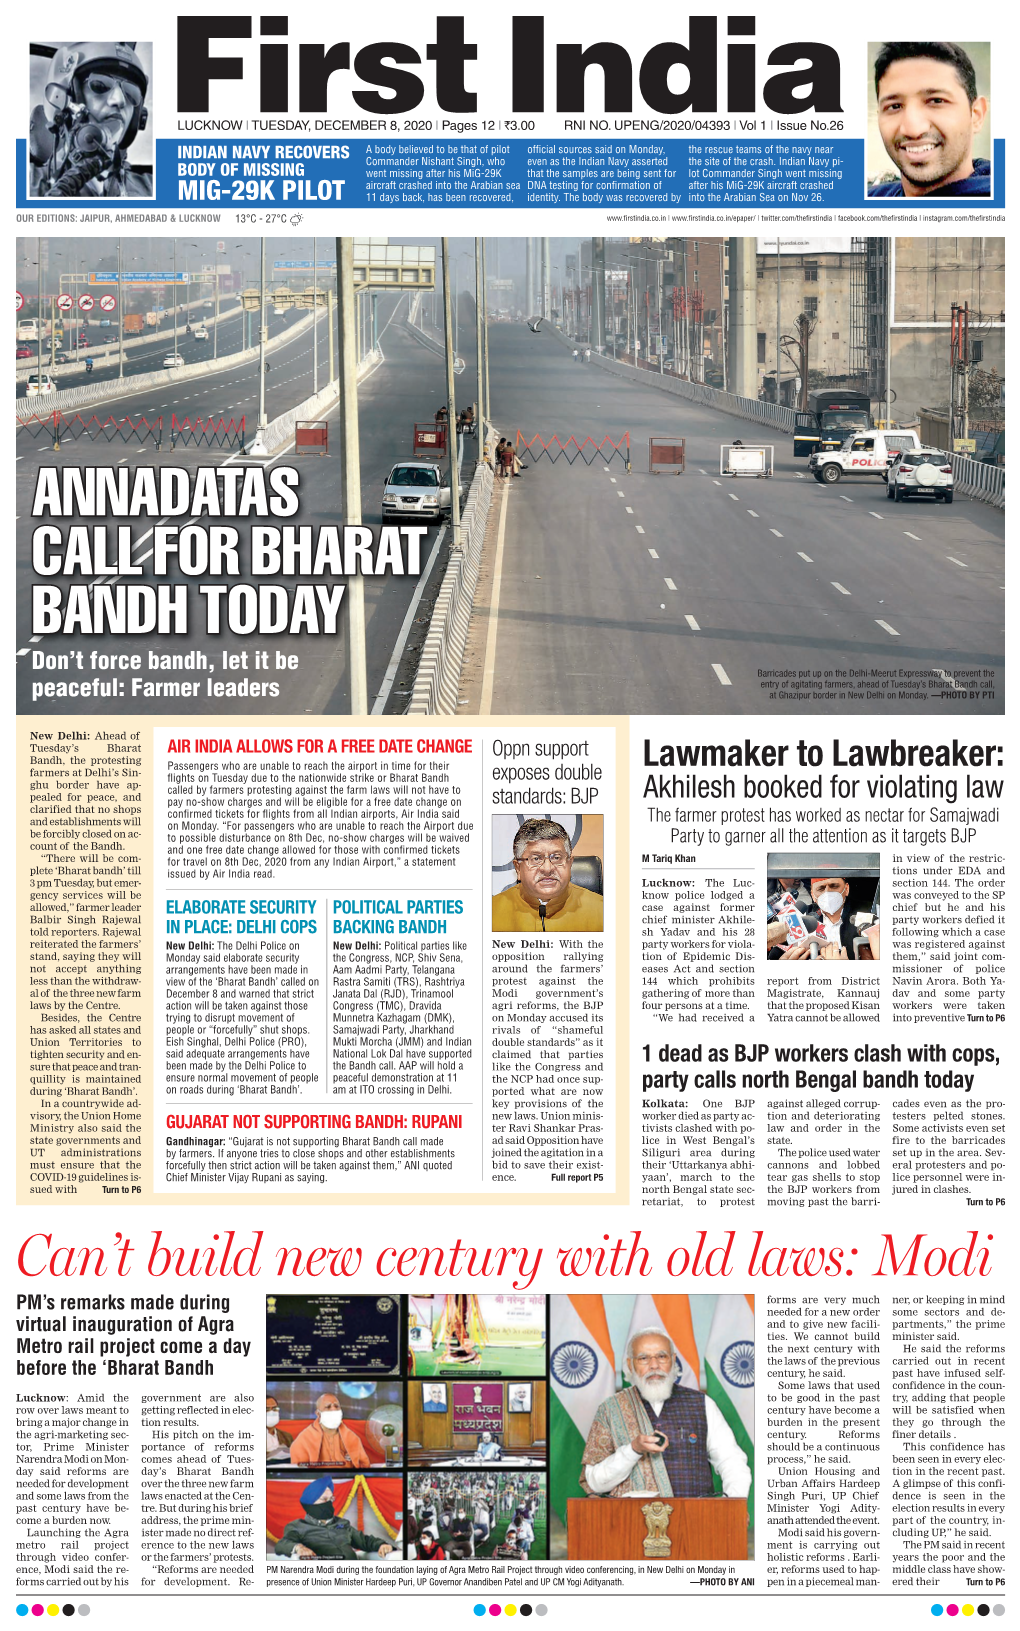 Annadatas Call for Bharat Bandh Today